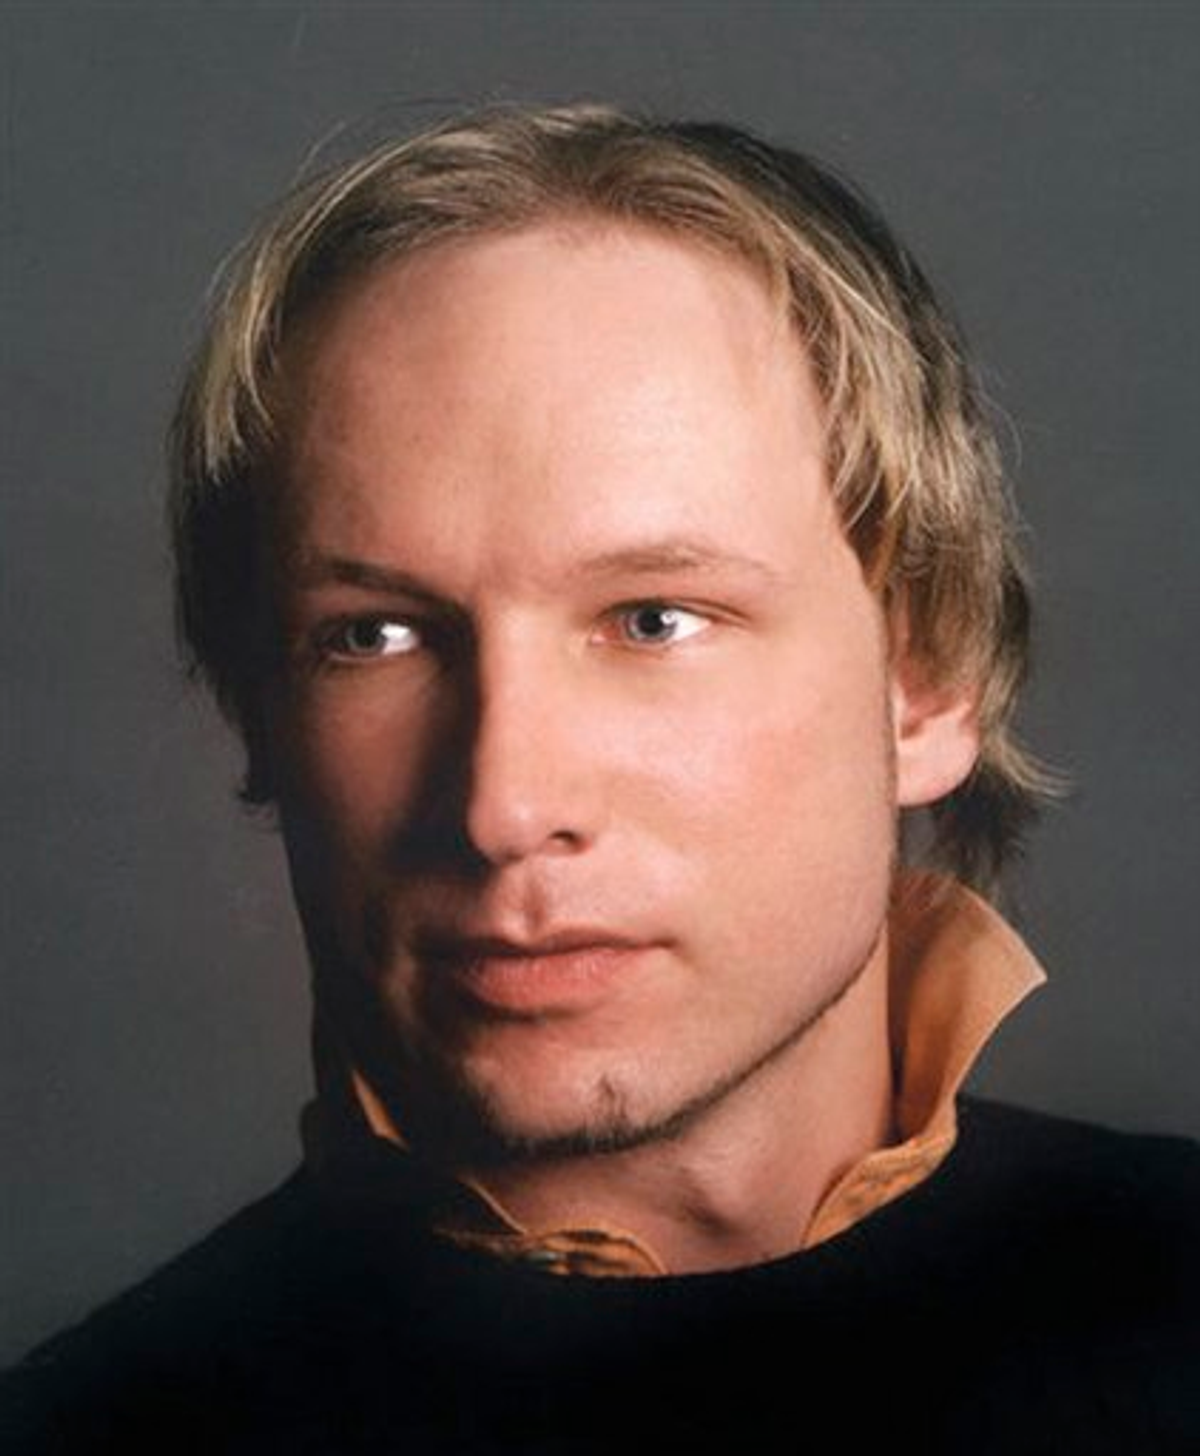 This is an undated image obtained from the Twitter page of Anders Behring Breivik